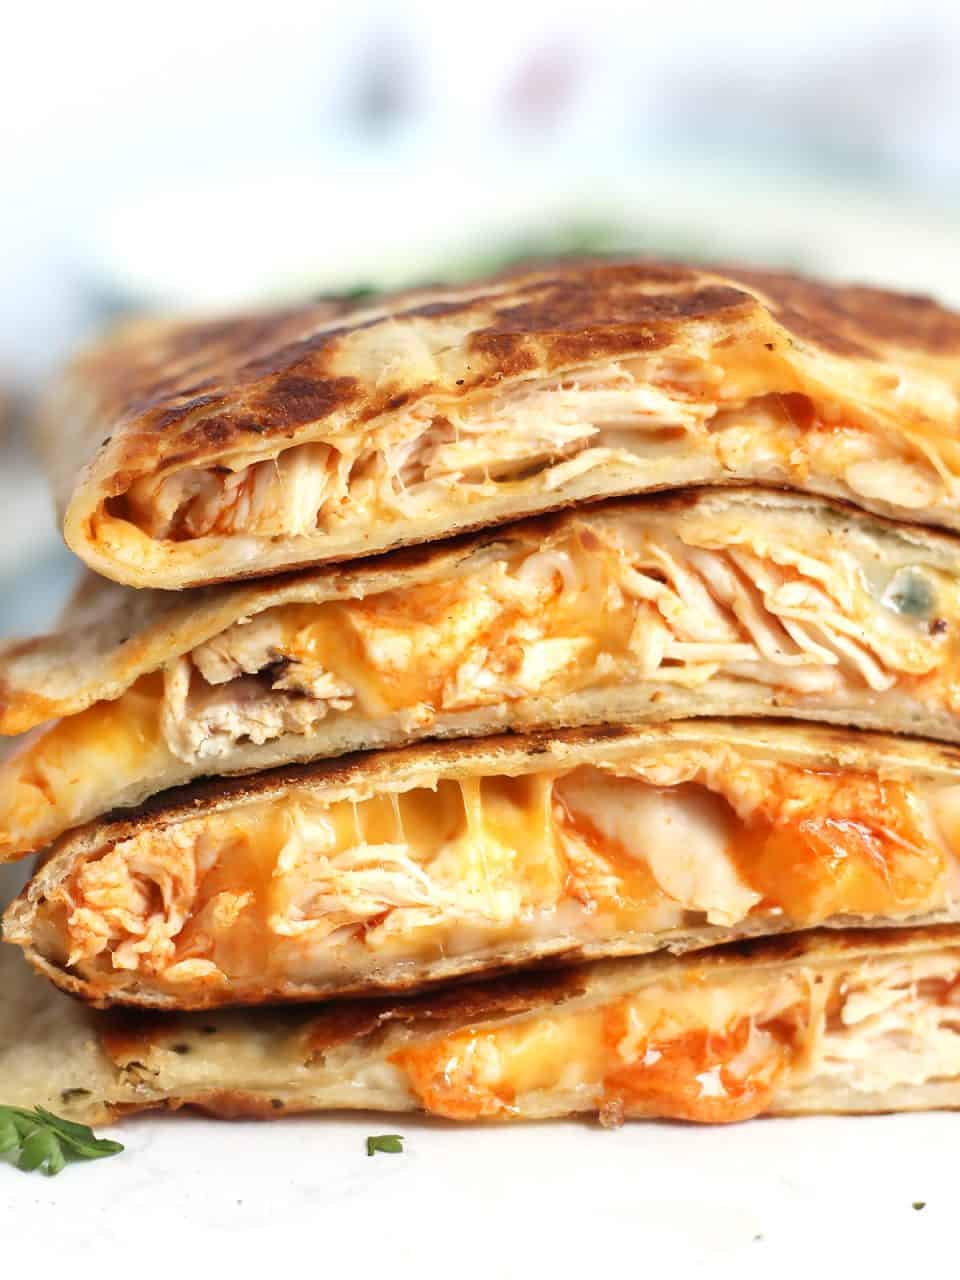 Buffalo chicken quesadillas cut in half and stacked on top of each other.